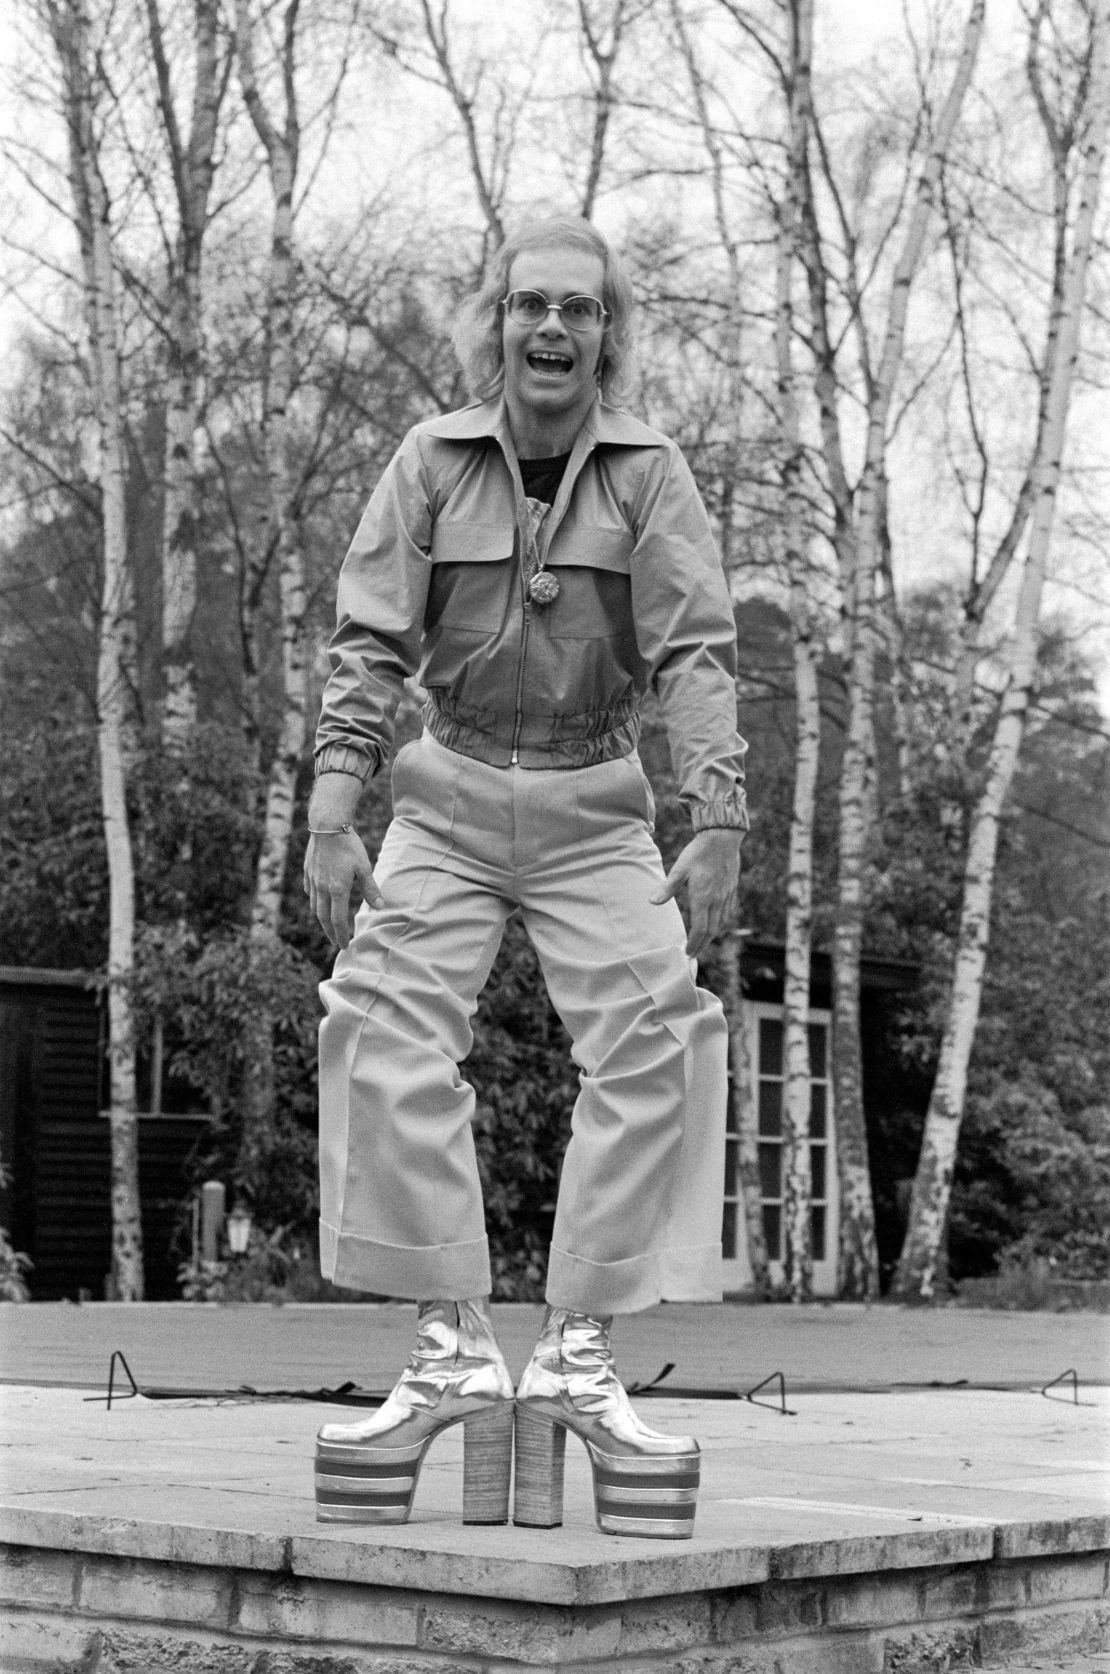 Elton John, pictured in 1973, wearing silver and red platform boots. Detailed with his initials E and J, the shoes are eight inches high and were created by Ken Todd of Kensington Market.